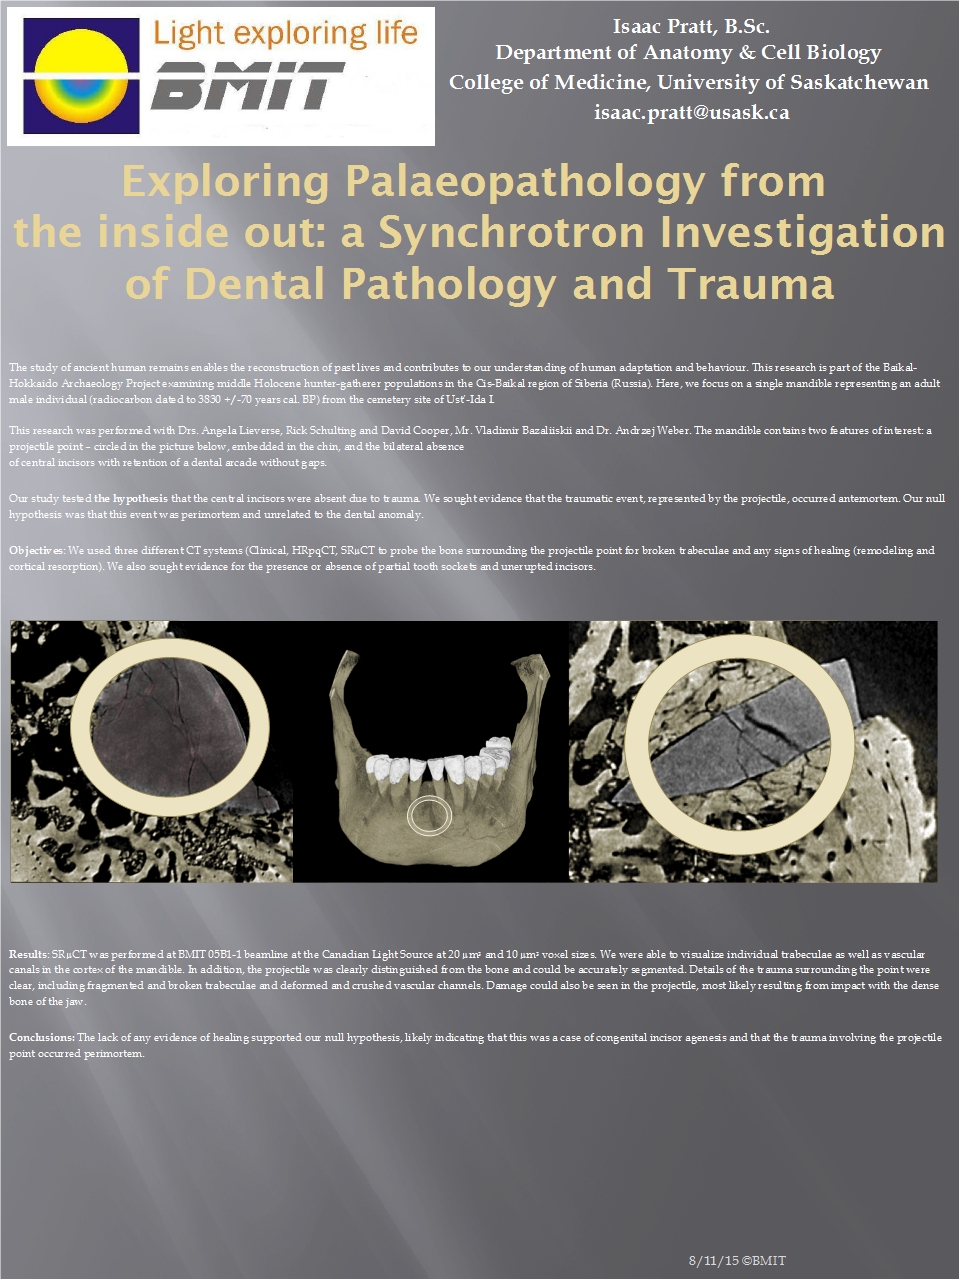 Exploring Paleopathology from the Inside Out: A Synchrotron Investigation of Dental Pathology and Trauma Image